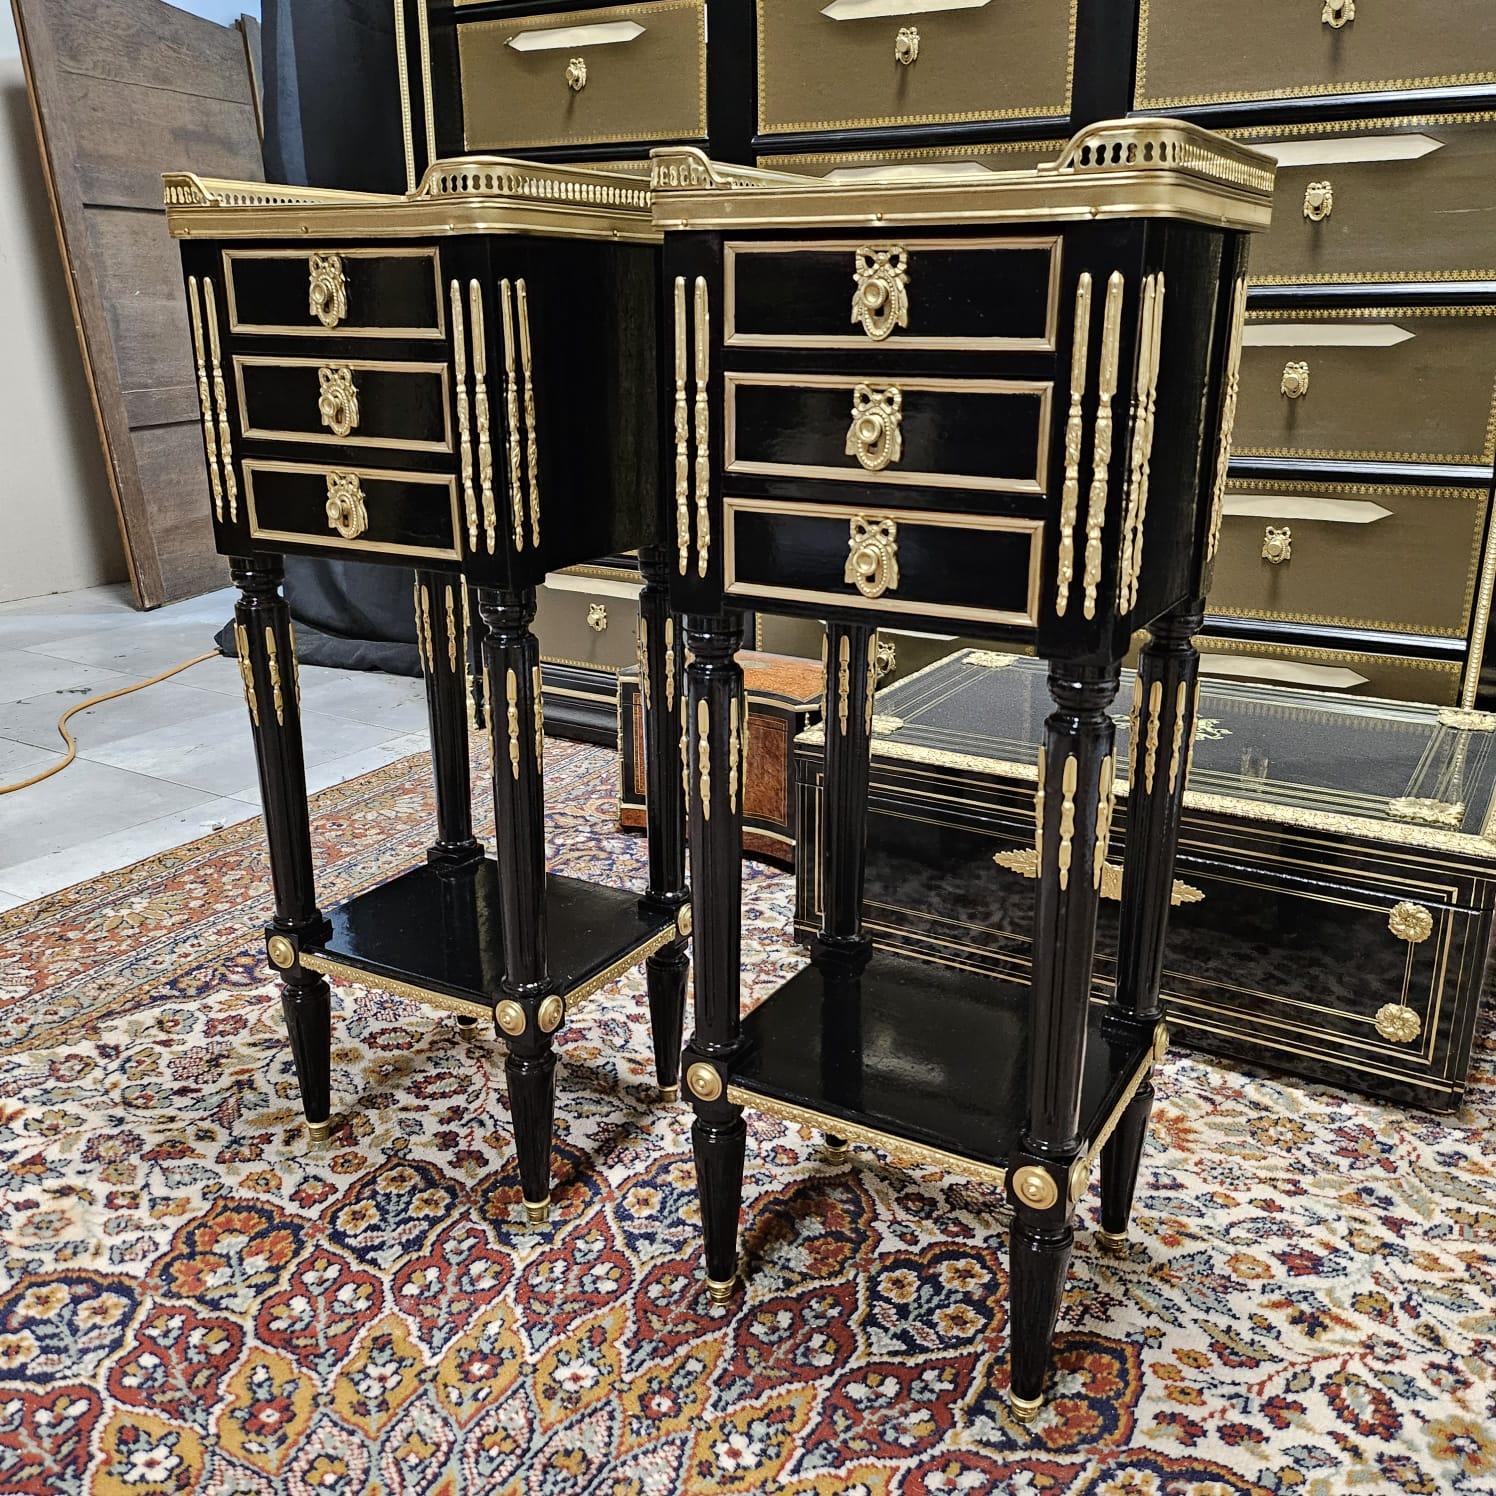 Luxurious Pair of Black Golden Night Stands Bedside Tables in Napoleon III Period Boulle Louis XVI style
Rare pair with added rich ornamentation of gilded bronzes with asparagus, key entries, buttons, ingot molds on the bottom edge, tapered feet